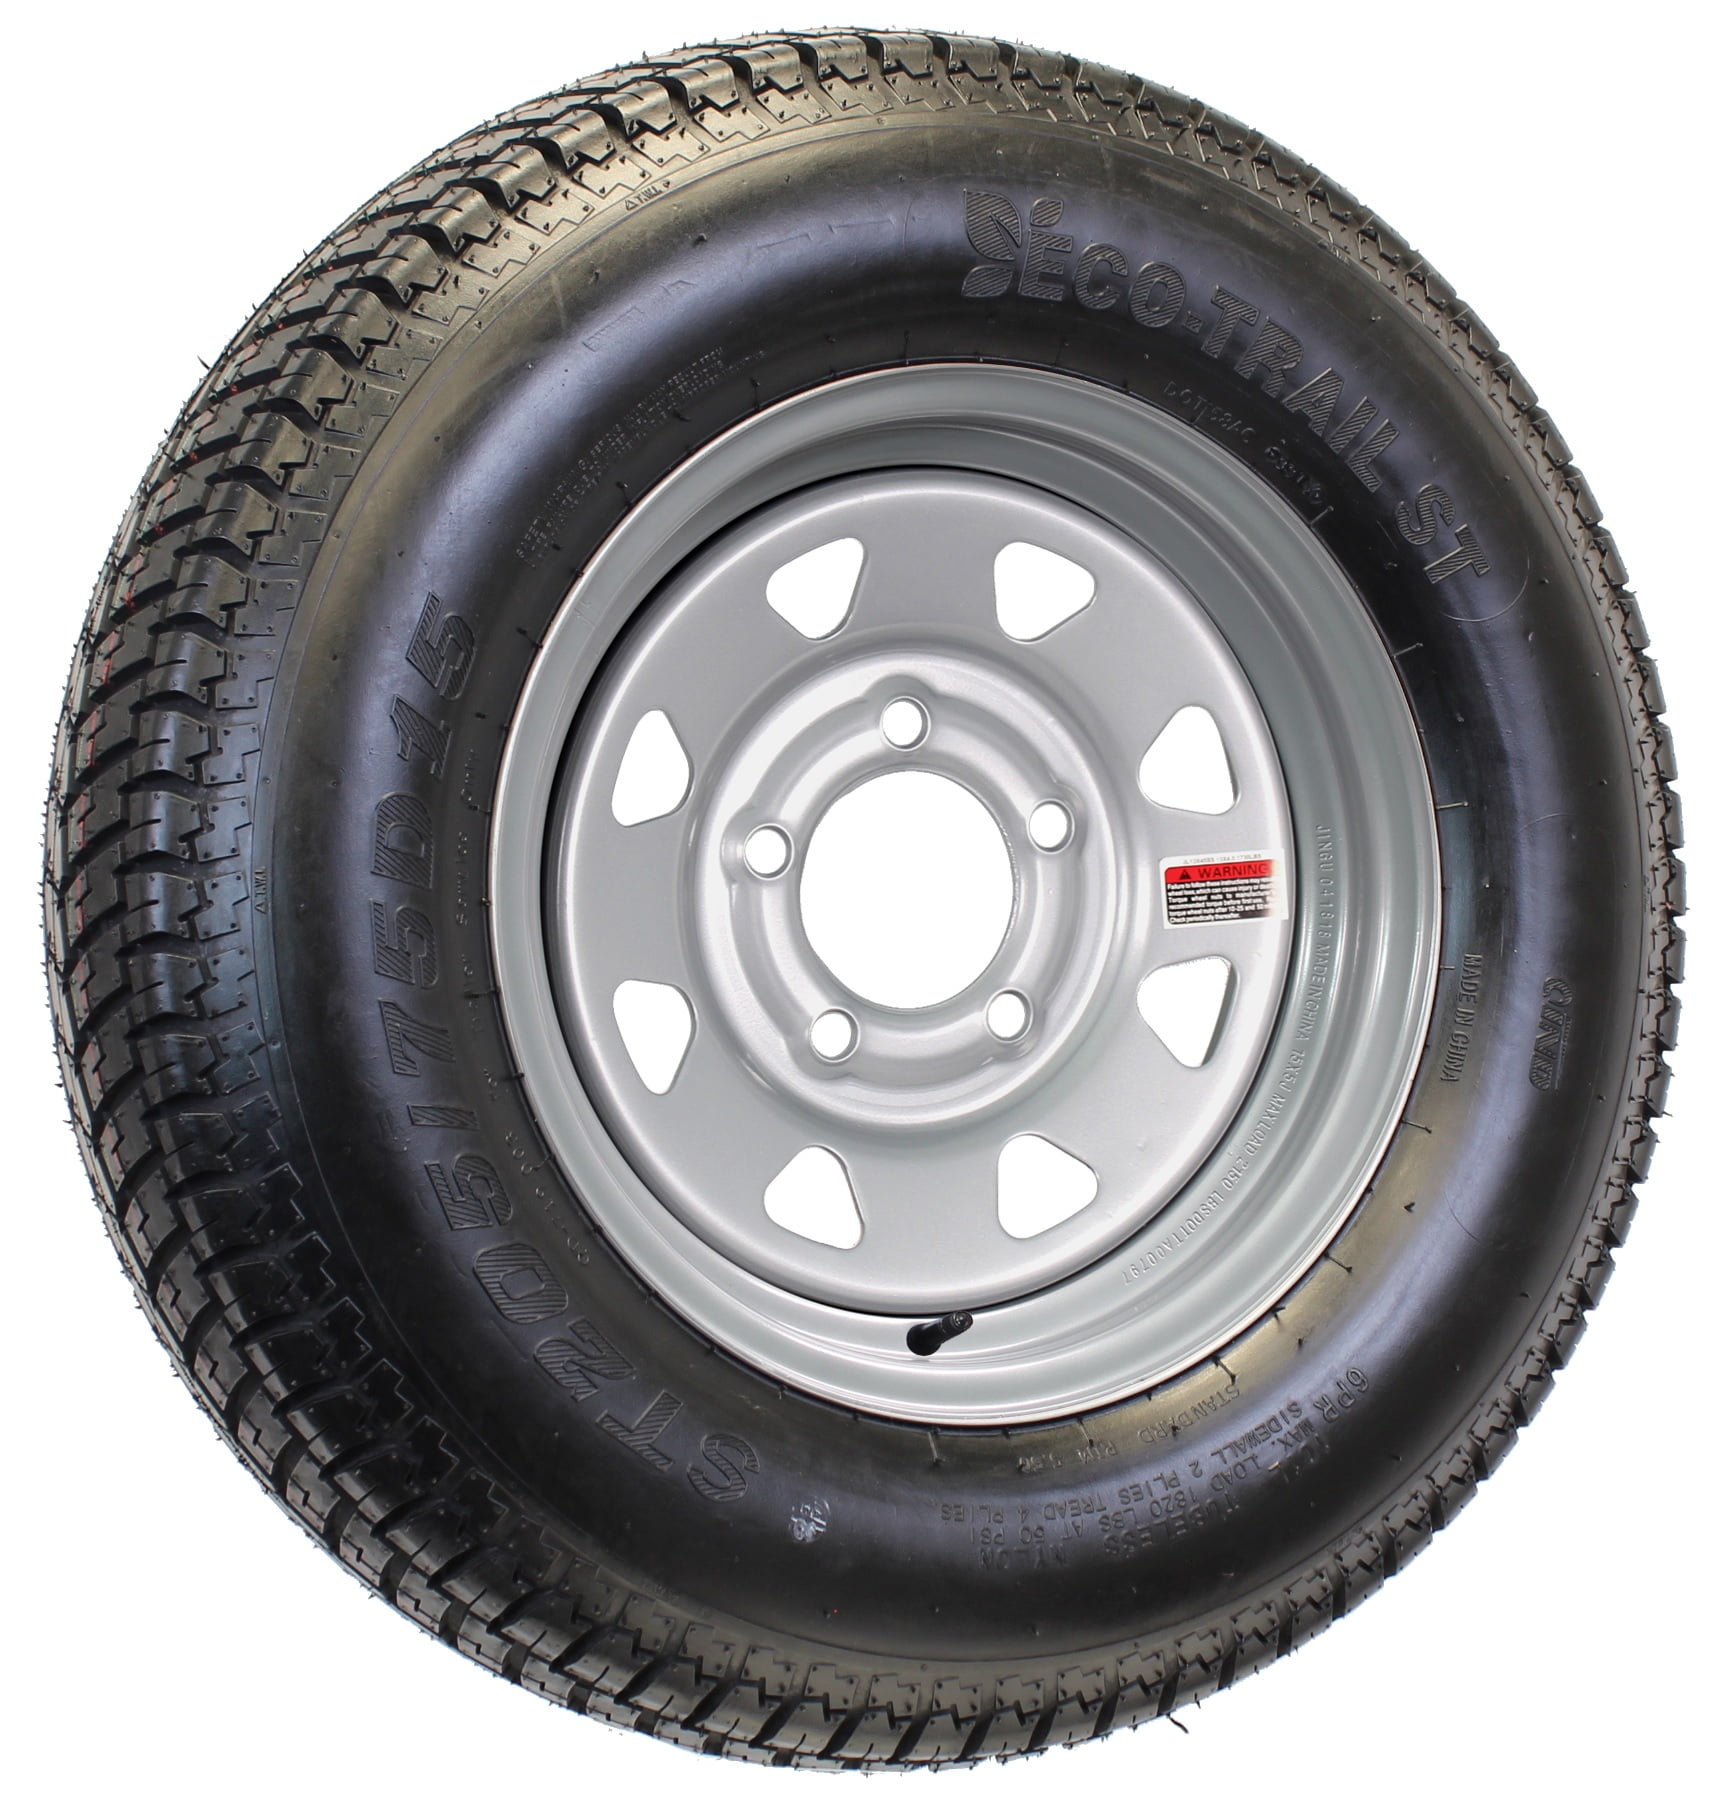 2-Pack Mounted Trailer Tire On Rim 205/75D-15 Modular Silver 5H Wheel 5 in. 